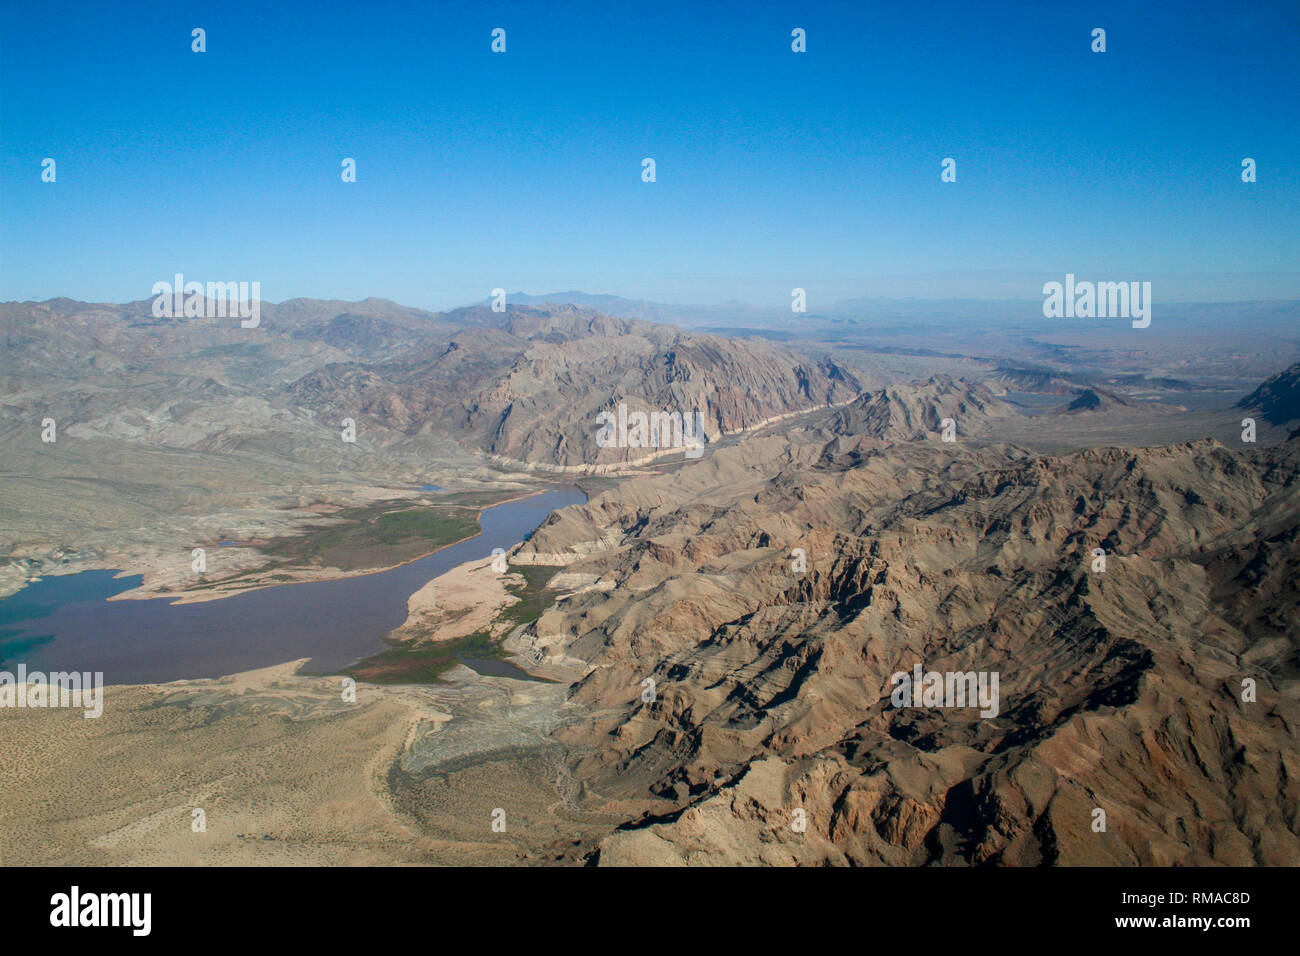 Aerial view of mountain range by Mead Lake, Nevada Stock Photo